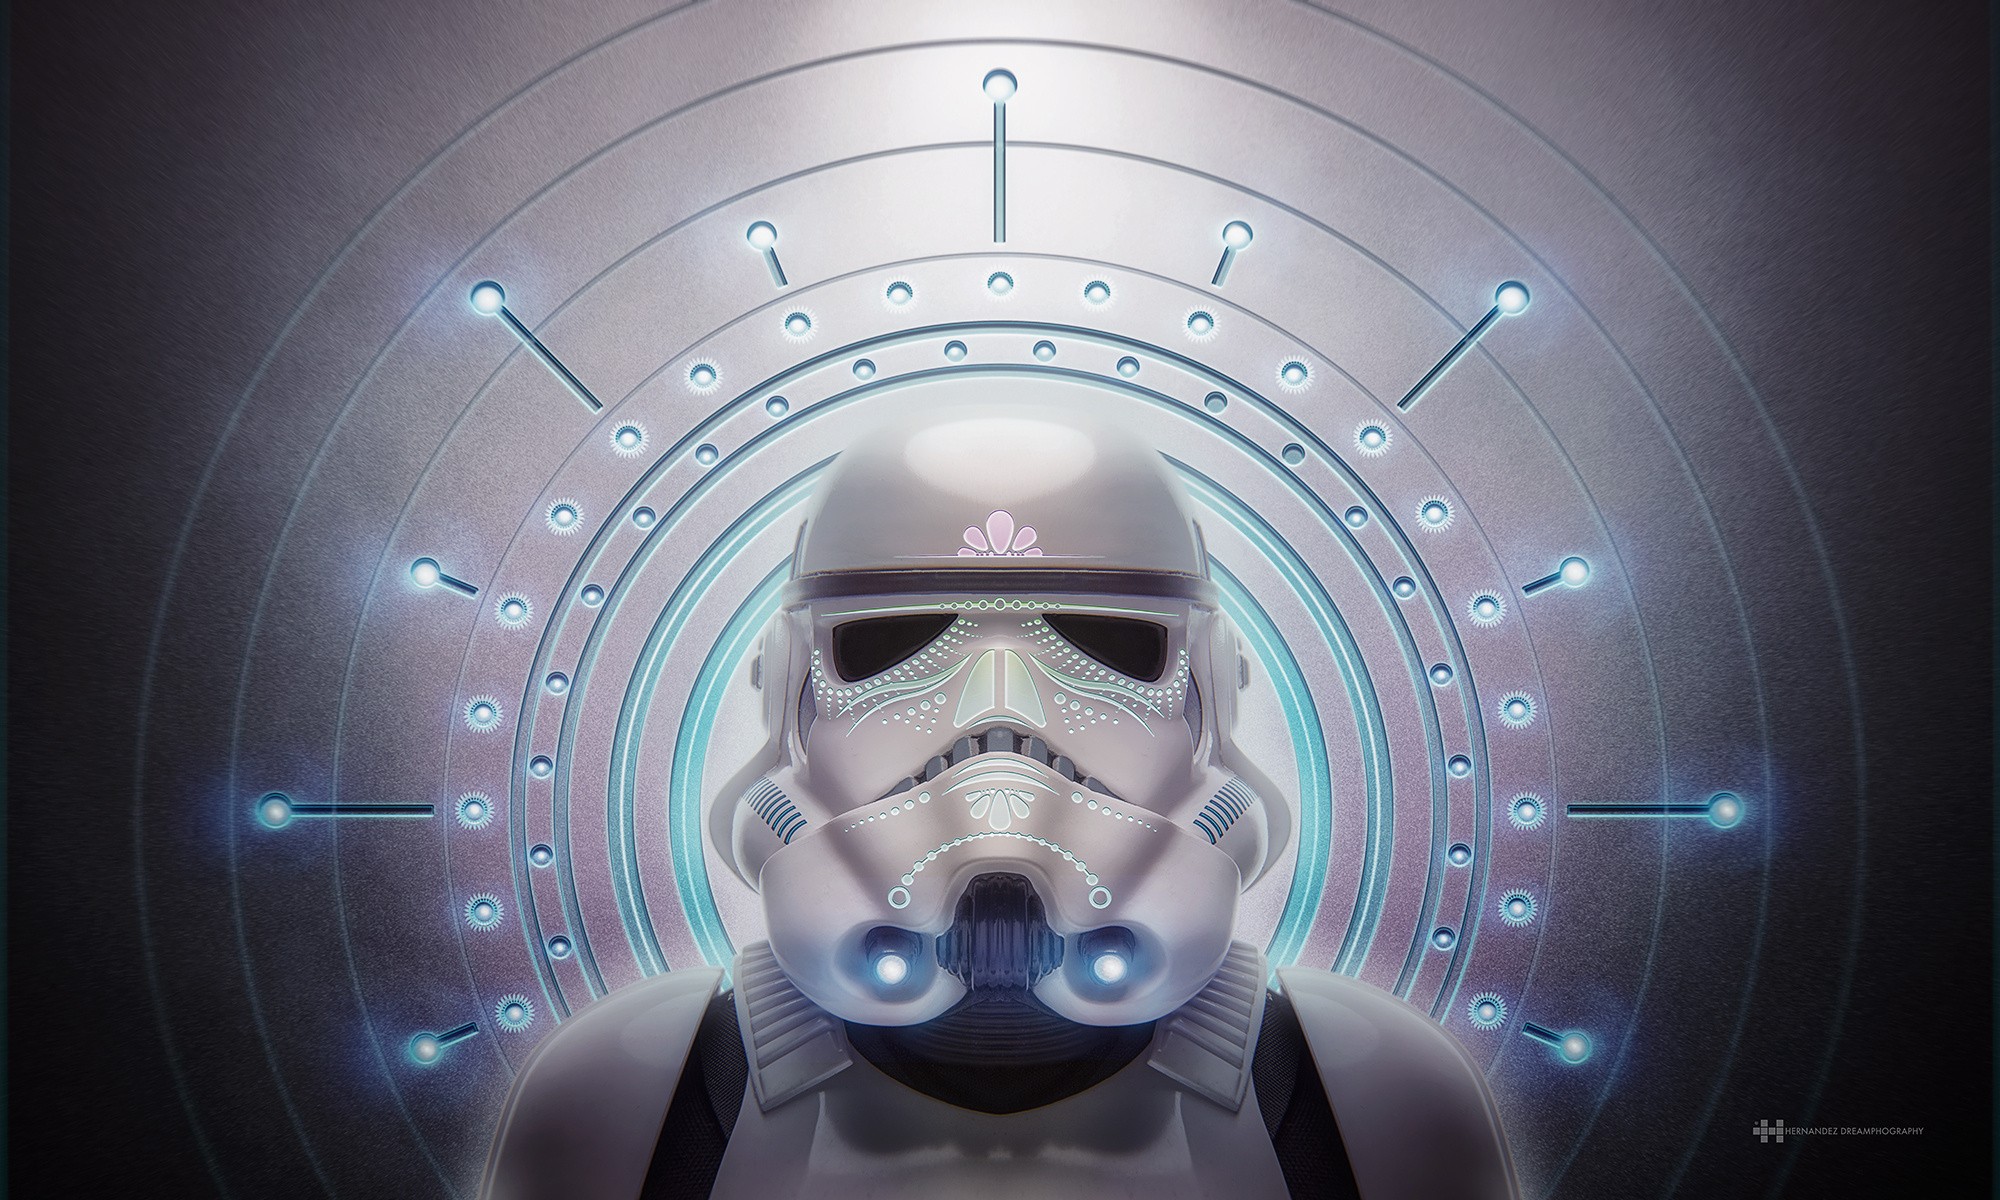 General 2000x1200 Star Wars Star Wars: Empire at War Imperial Forces stormtrooper Imperial Stormtrooper PC gaming video games science fiction